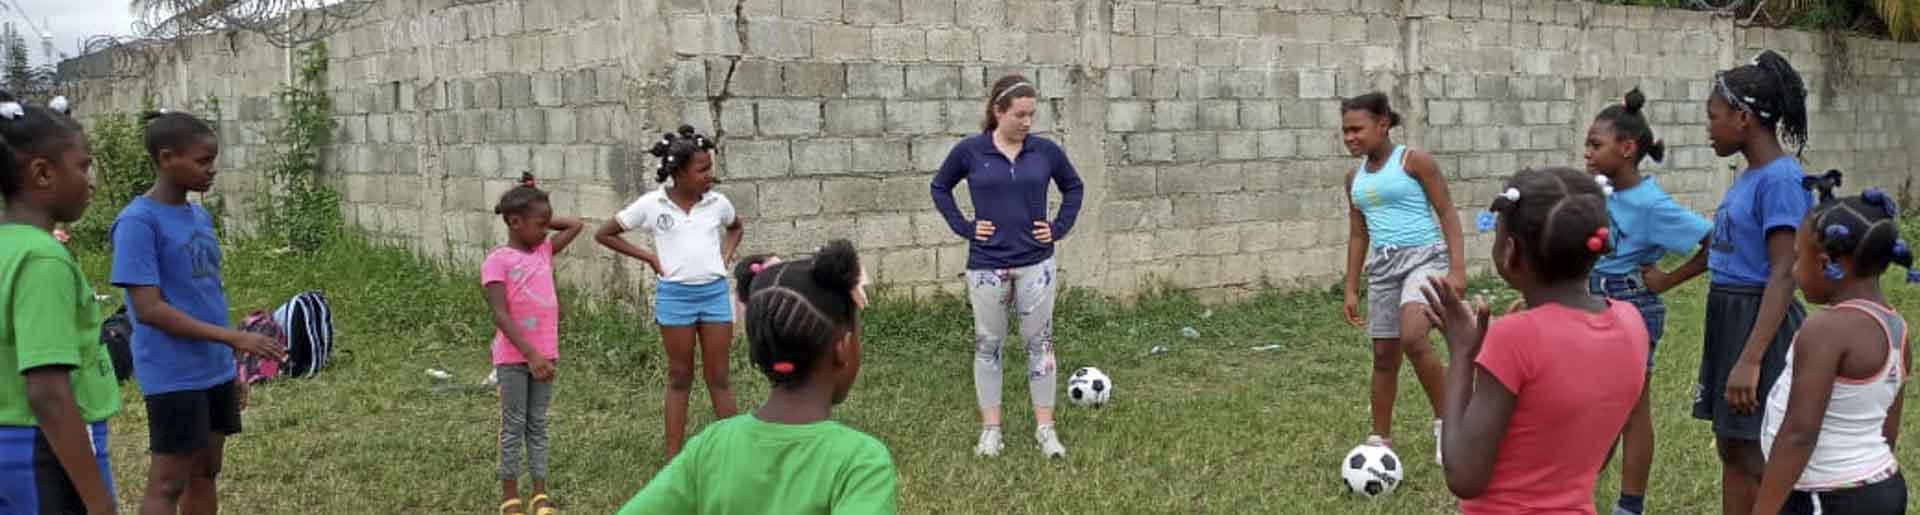 Katie Baird pictured at a soccer practice with girls from the two local schools Lafwa ran